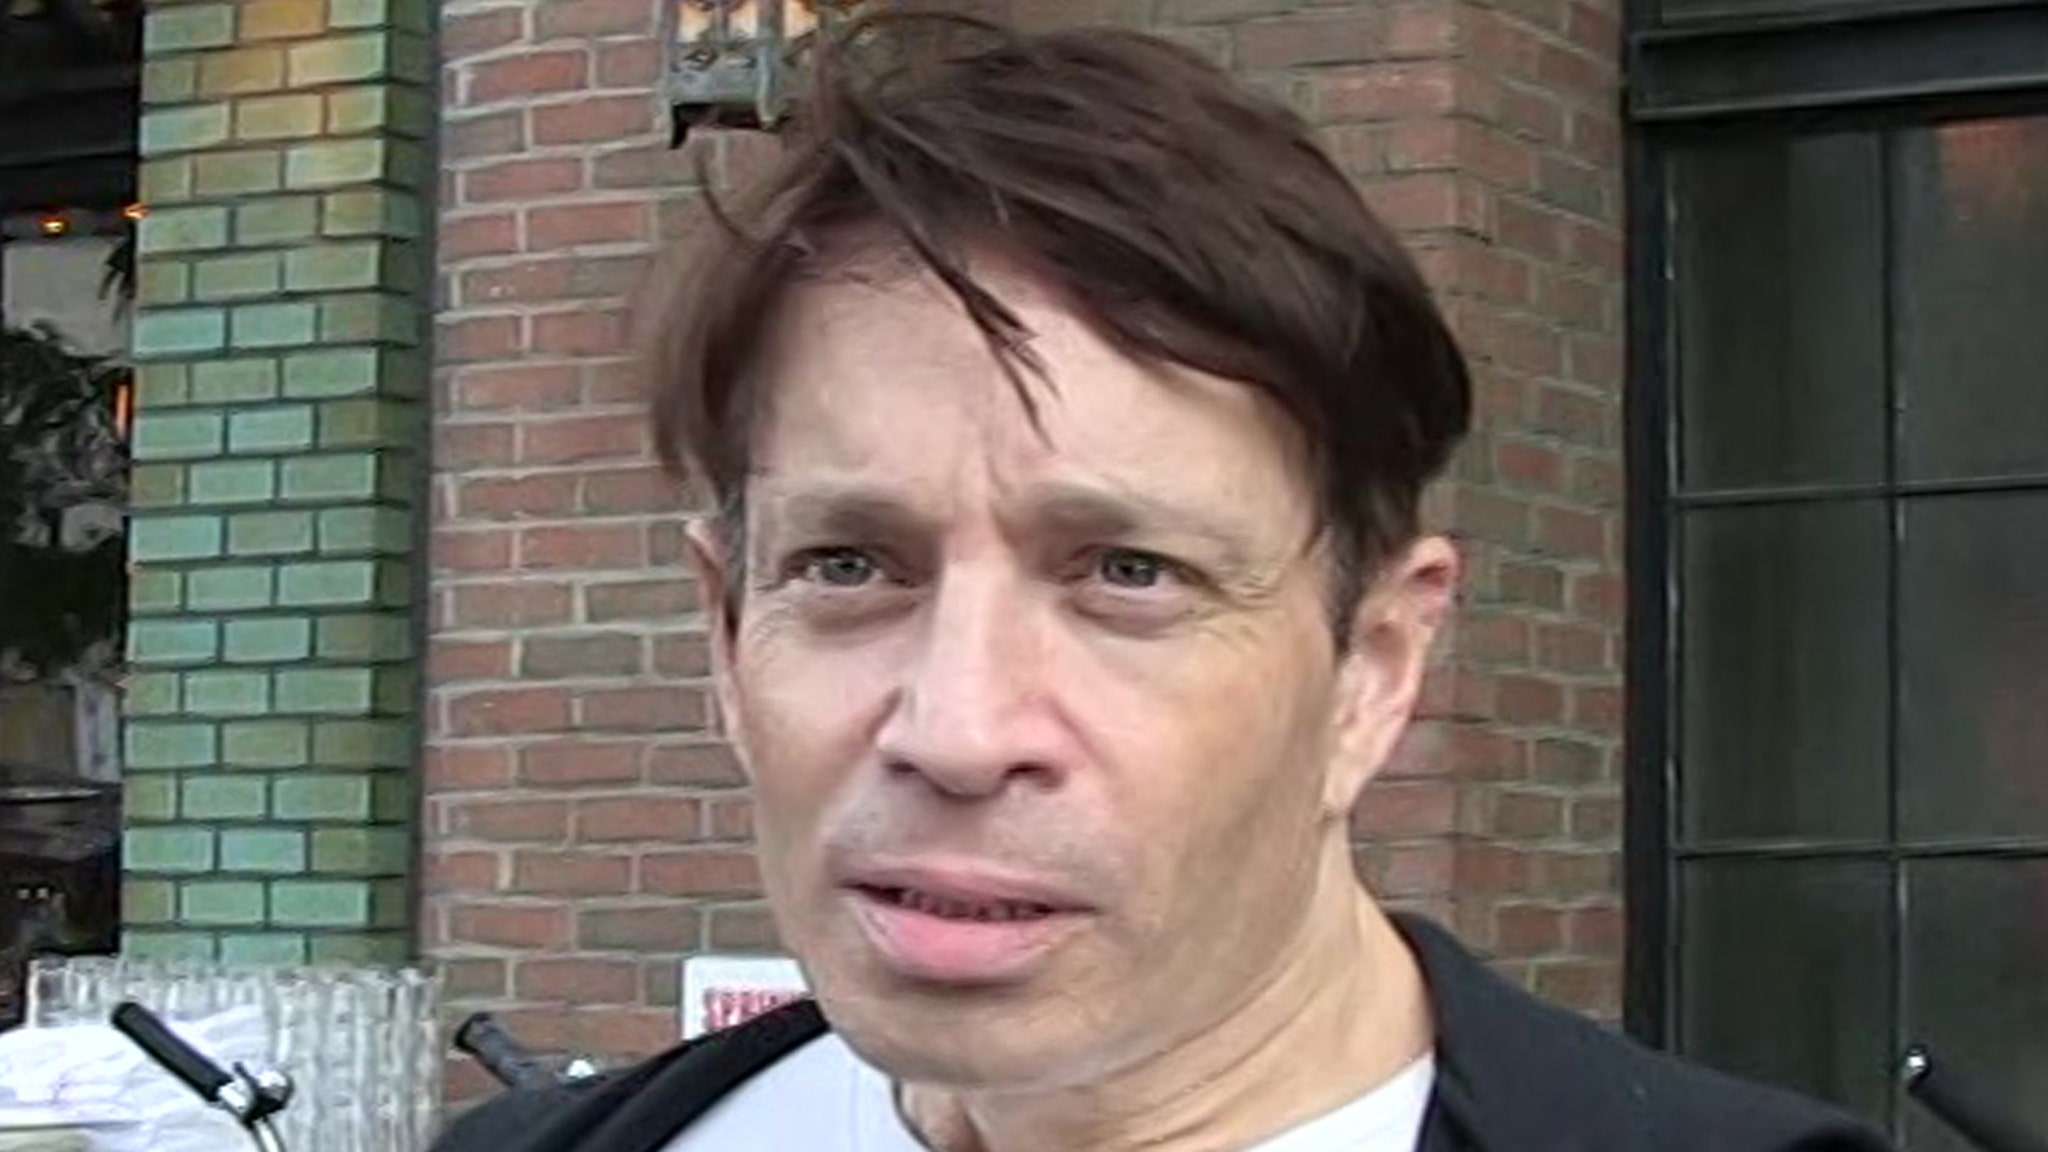 Chris Kattan Booted from Flight for Refusing to Wear Mask